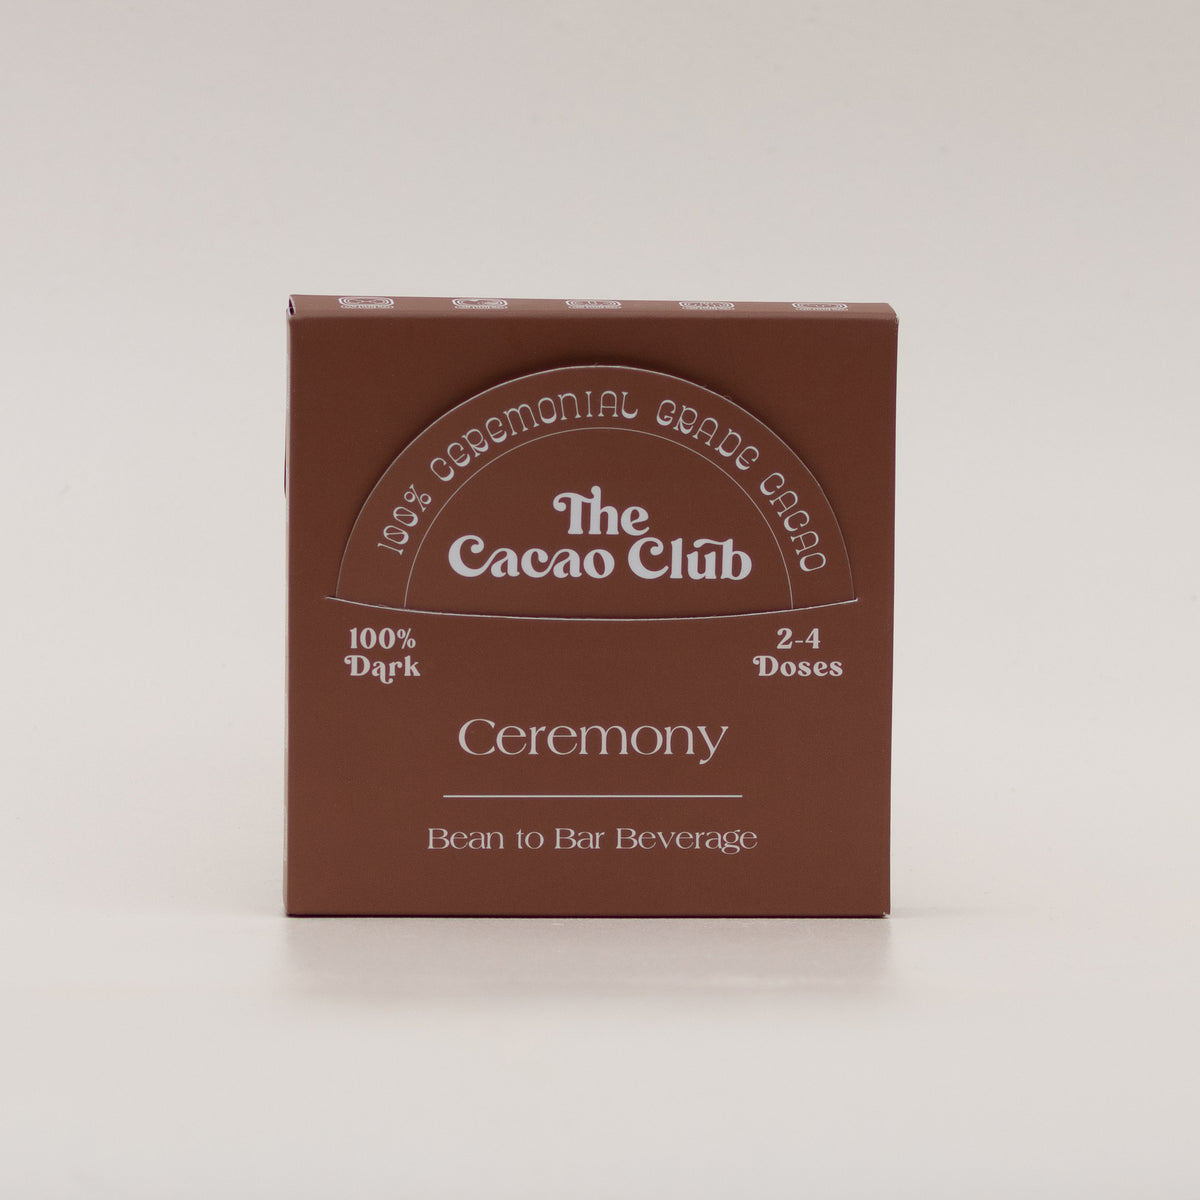 Ceremonial Cacao Ceremony Blend (Hot Cacao Drink) by The Cacao Club